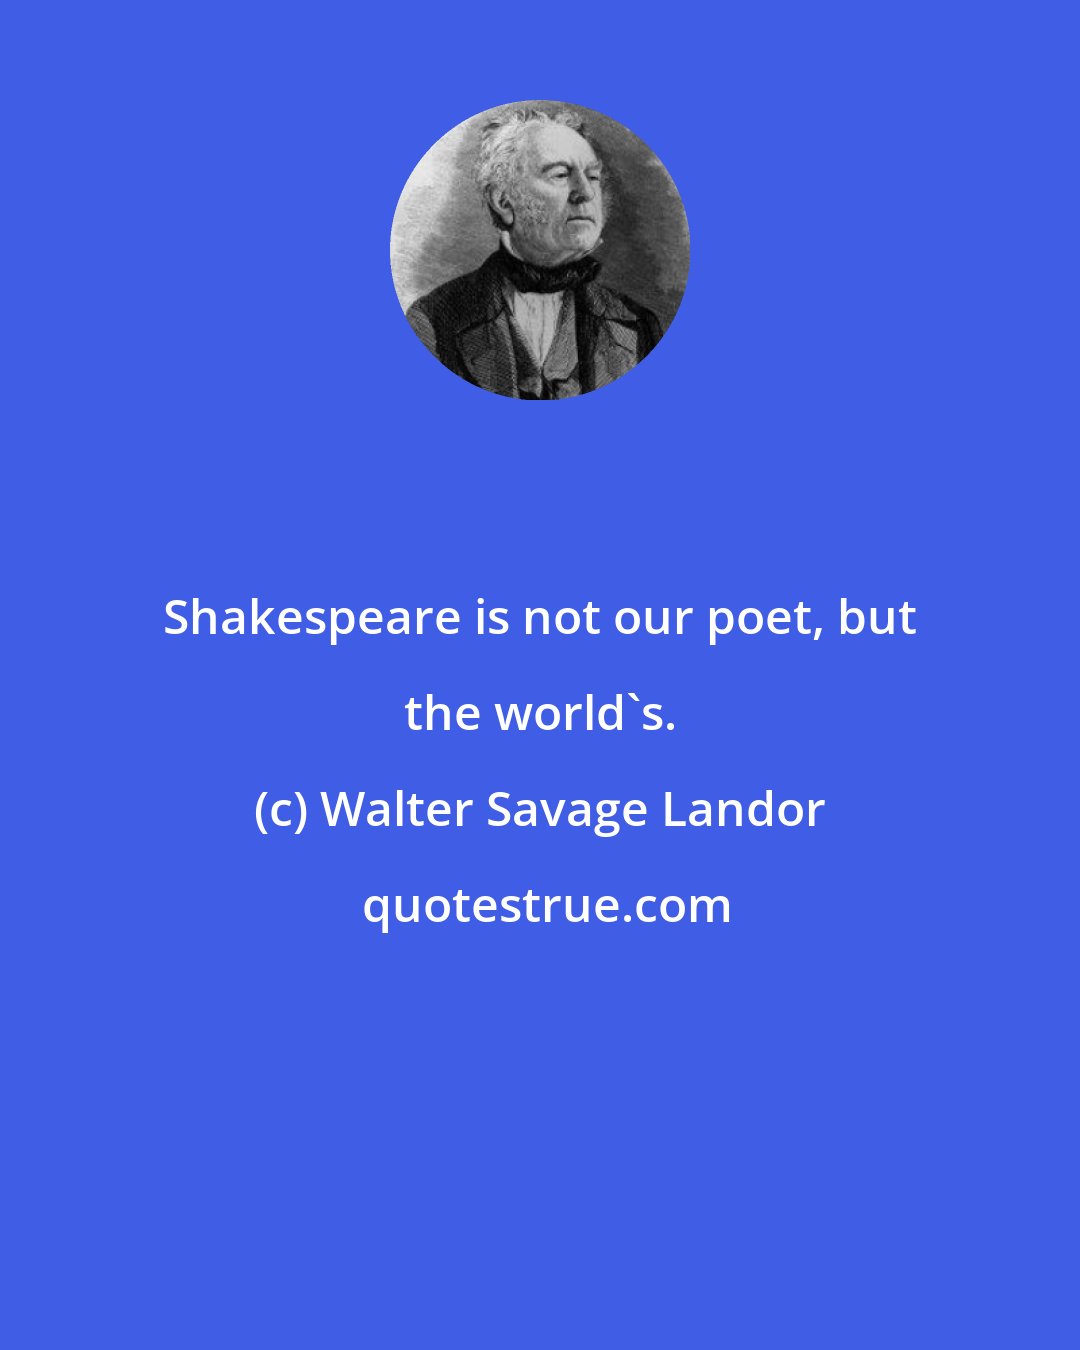 Walter Savage Landor: Shakespeare is not our poet, but the world's.